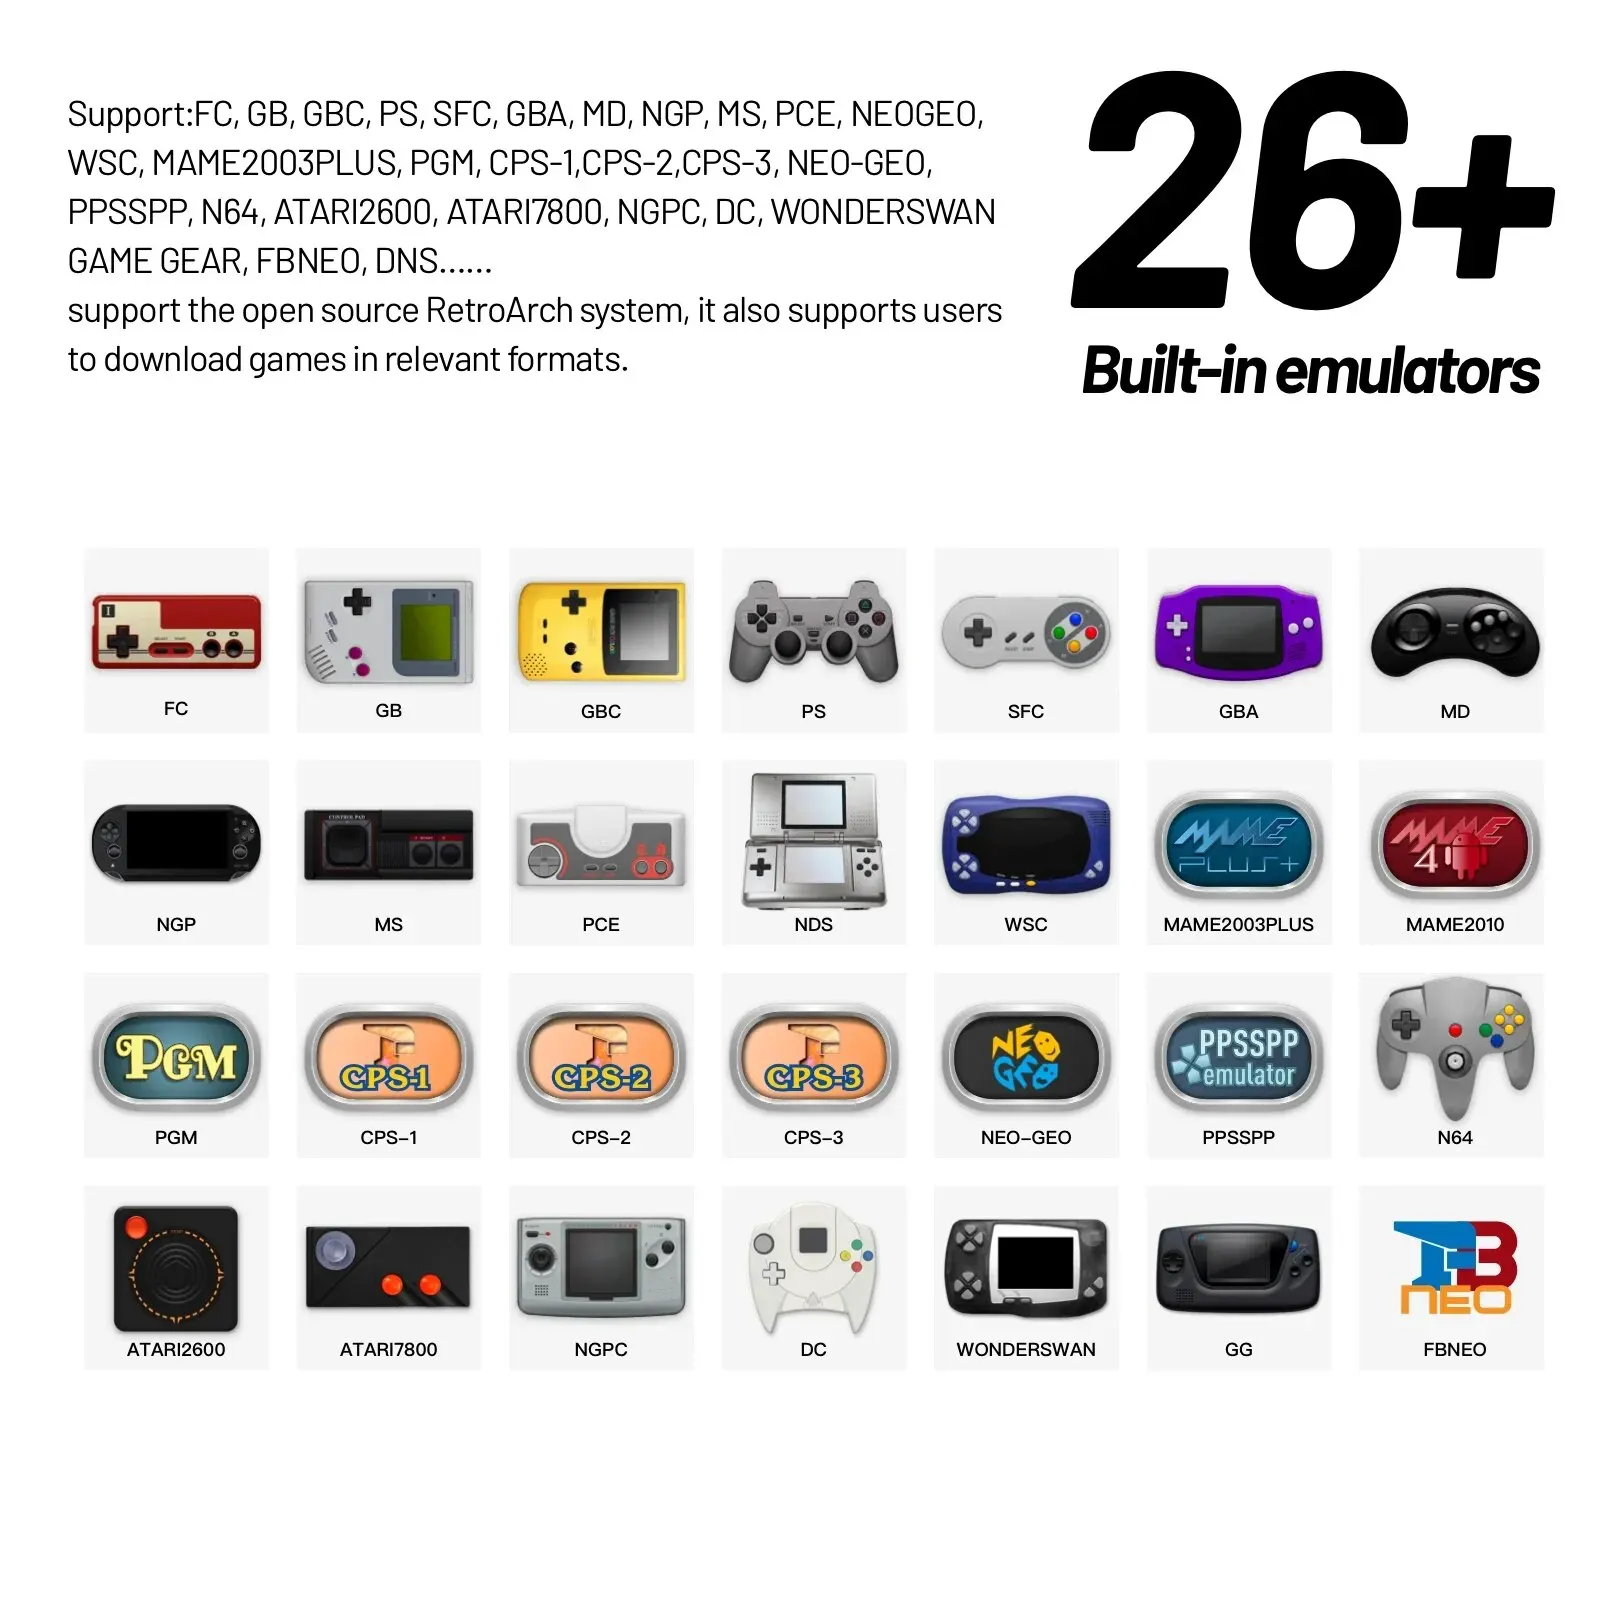 Trimui Smart Pro Vintage Handheld Game Console Wireless Handheld Gamer Console Retro Arcade 4.96 Inch HD IPS Screen Game Console images - 6